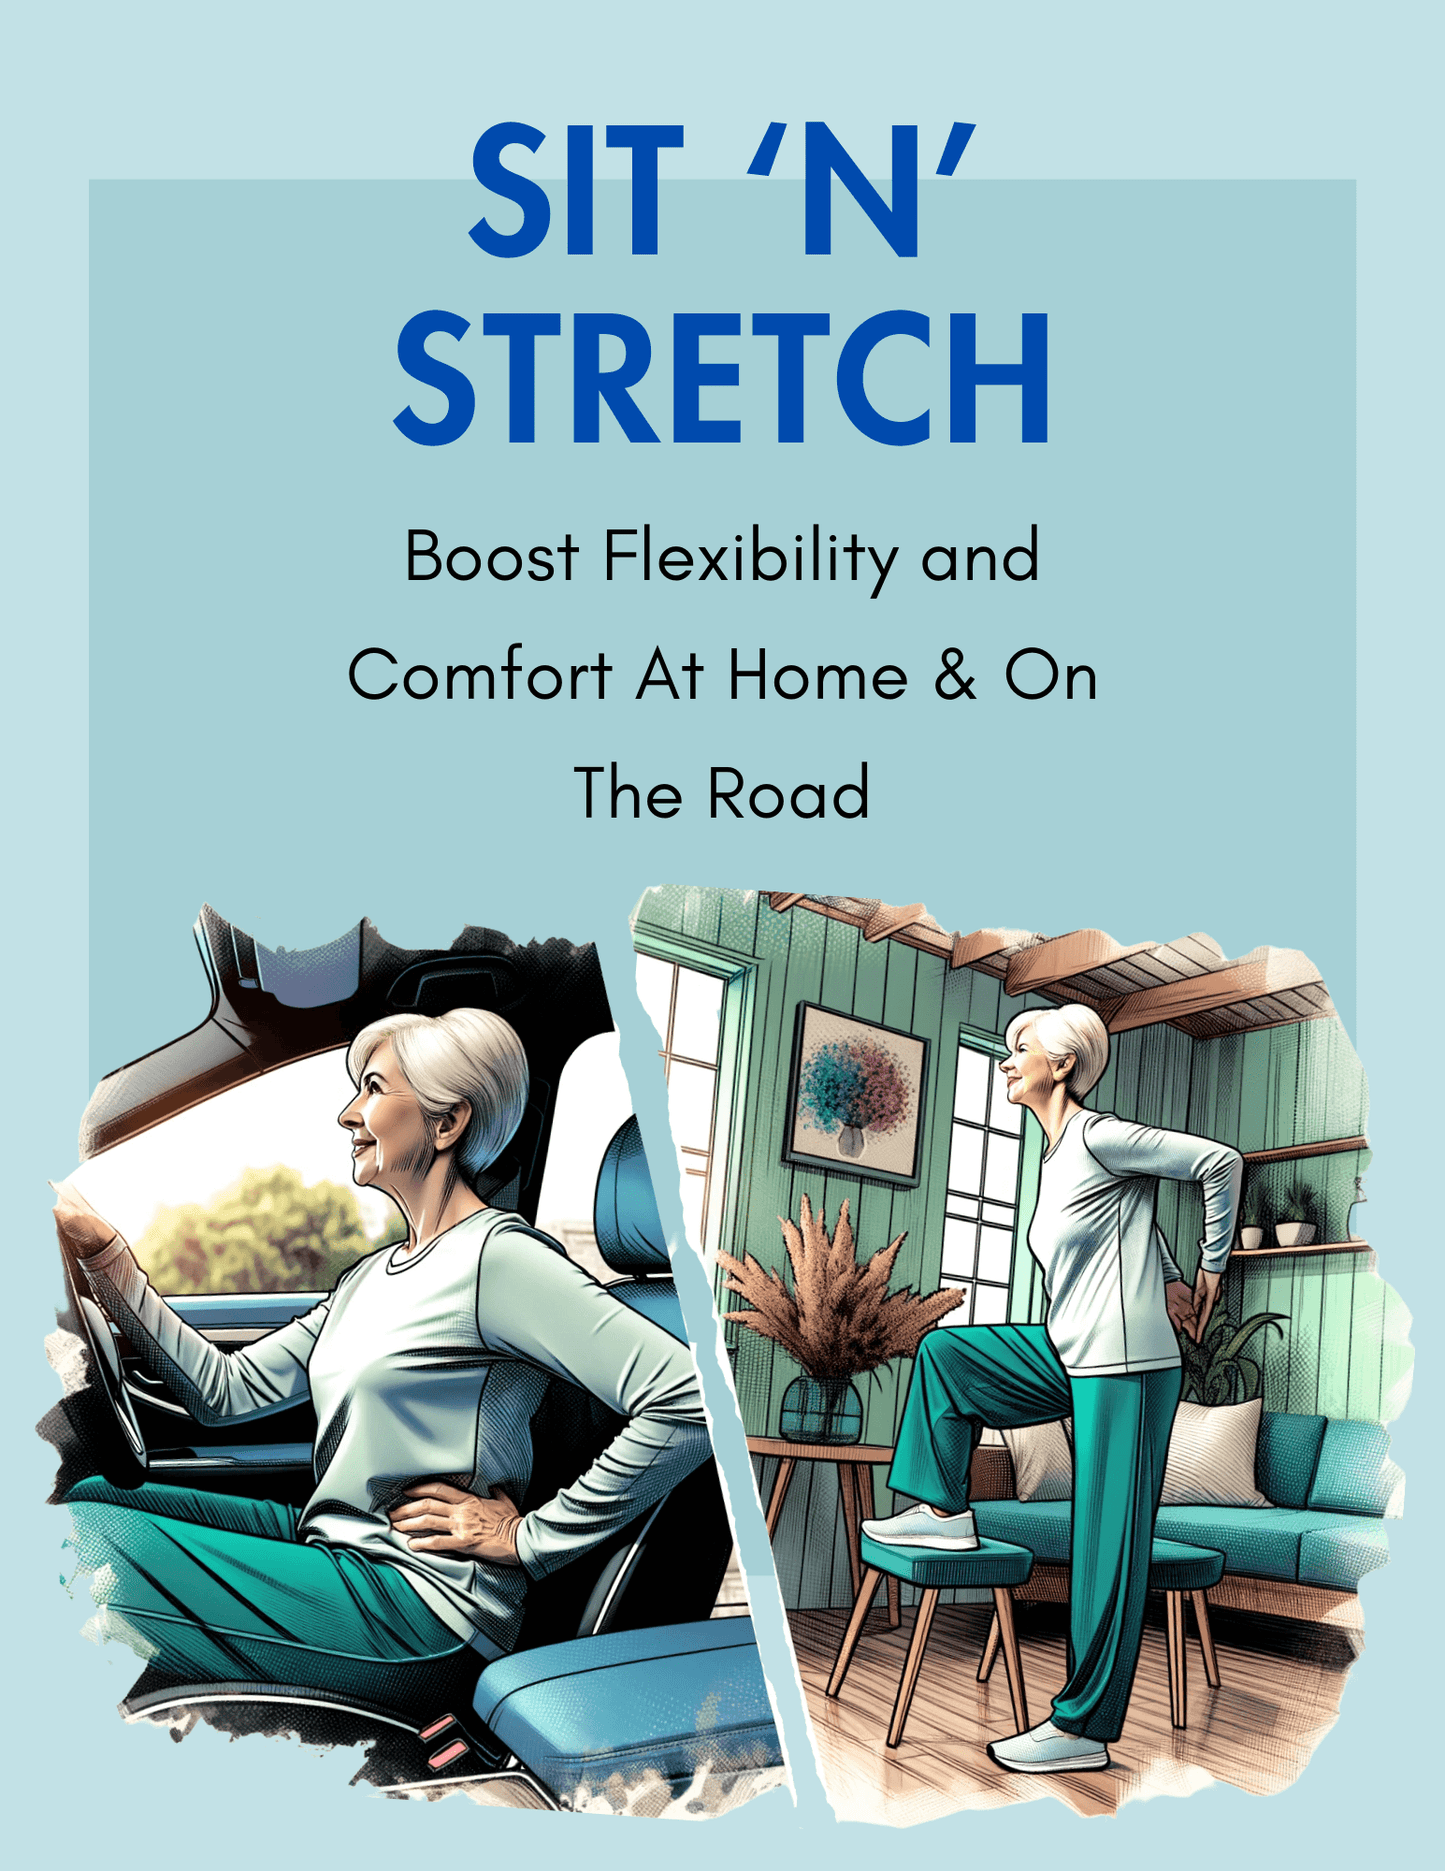 Sit ‘n’ Stretch - Boost Flexibility and Comfort At Home & On The Road